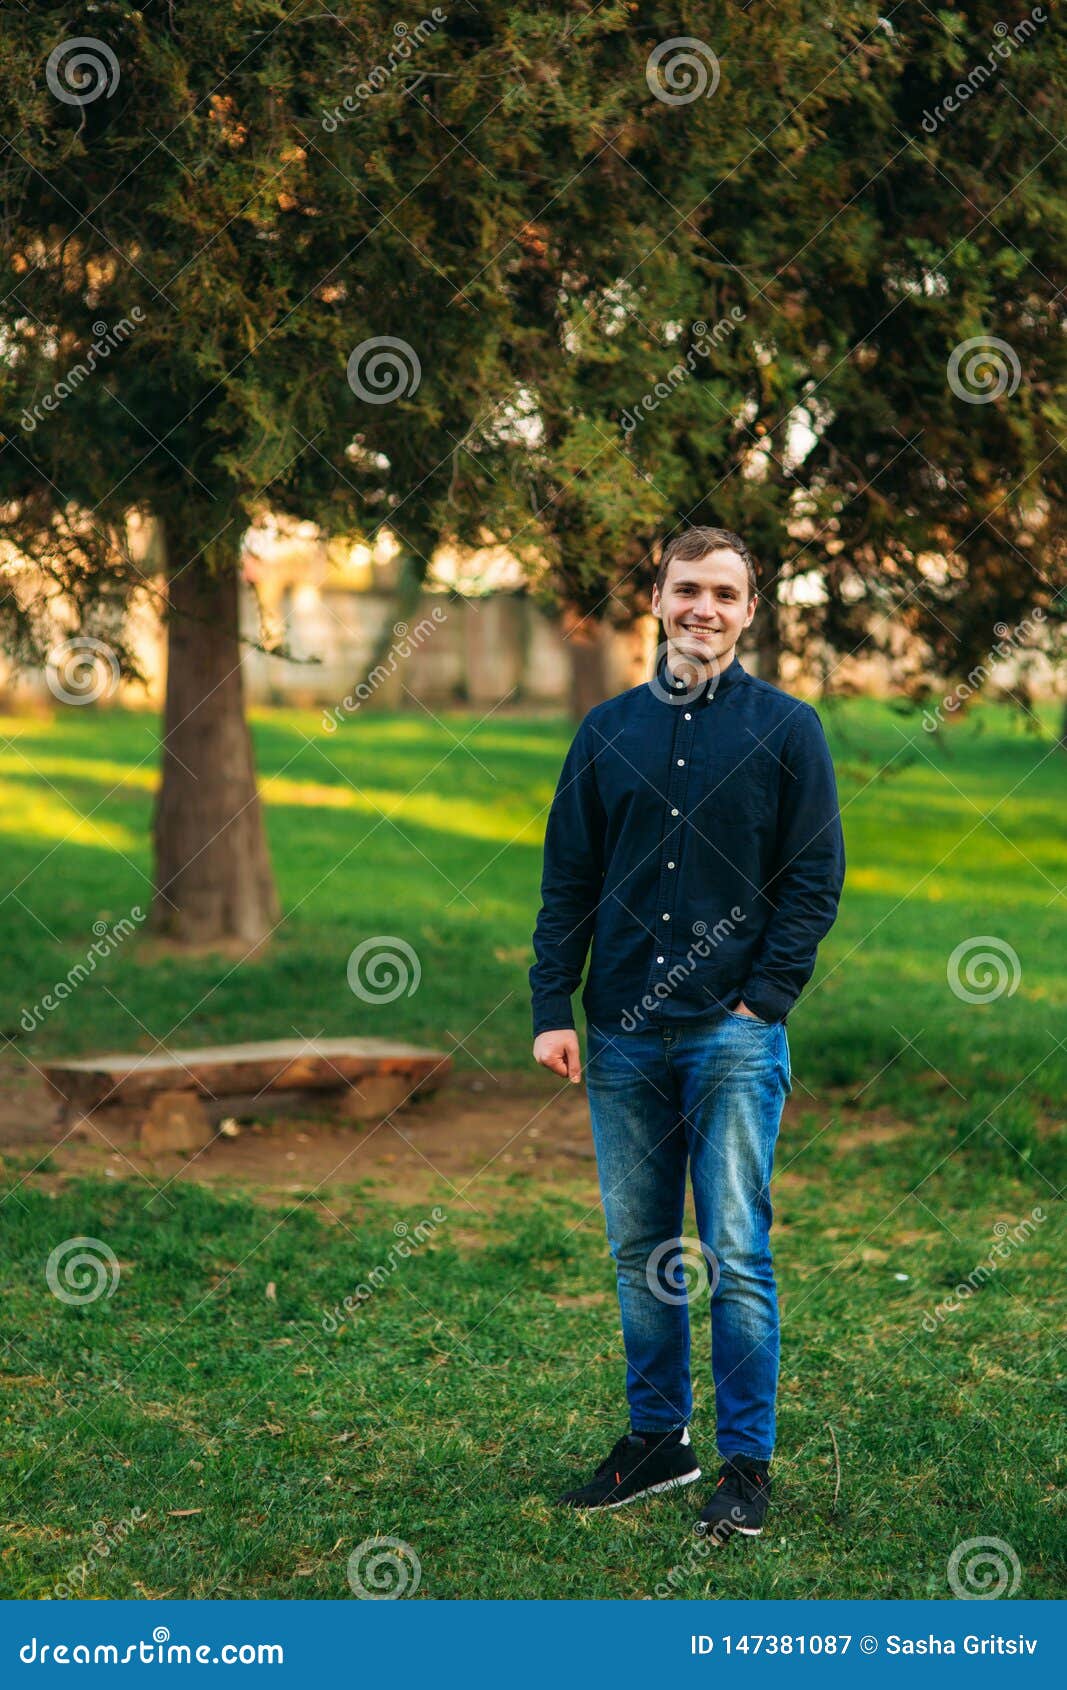 Man in Dark Blue Shirt Standing in the Park Stock Image - Image of ...